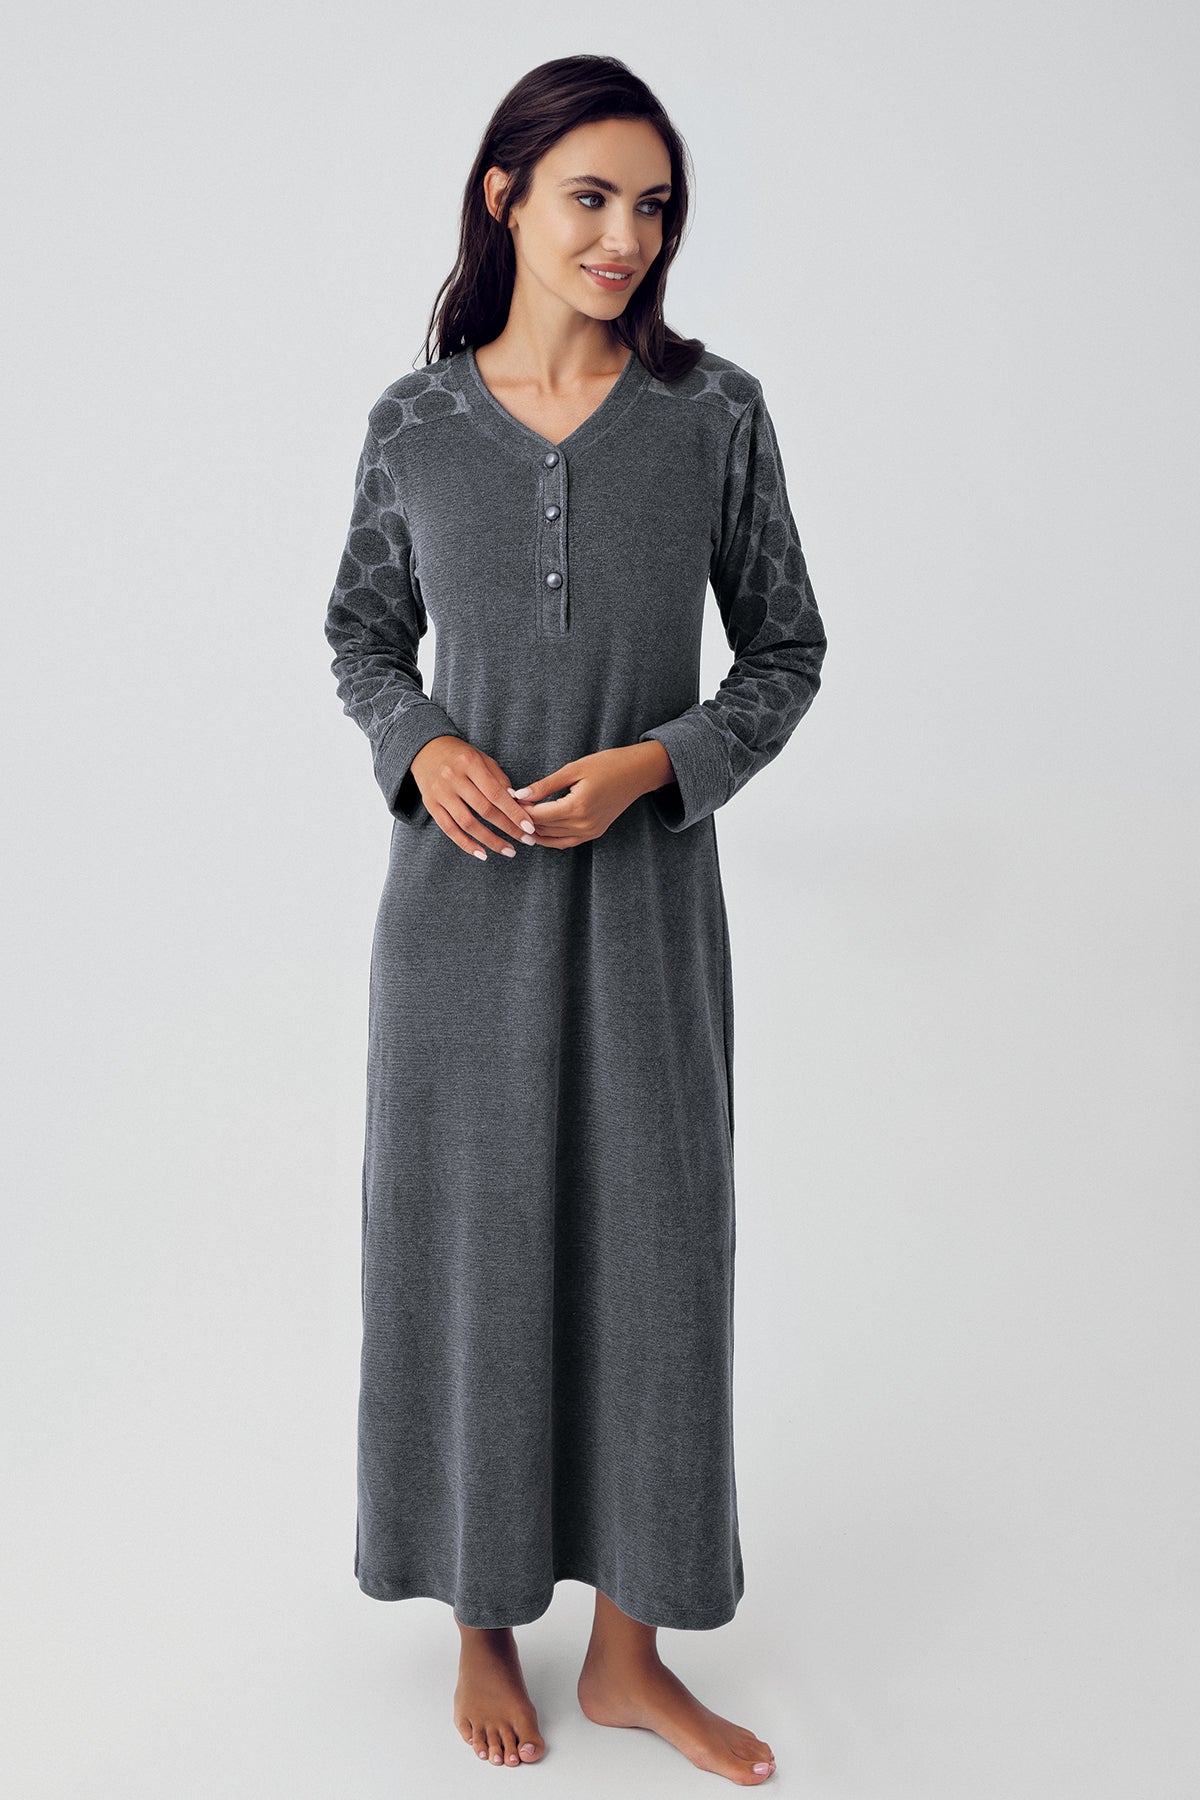 Shopymommy 15101 Terry Jacquard Maternity & Nursing Nightgown Anthracite